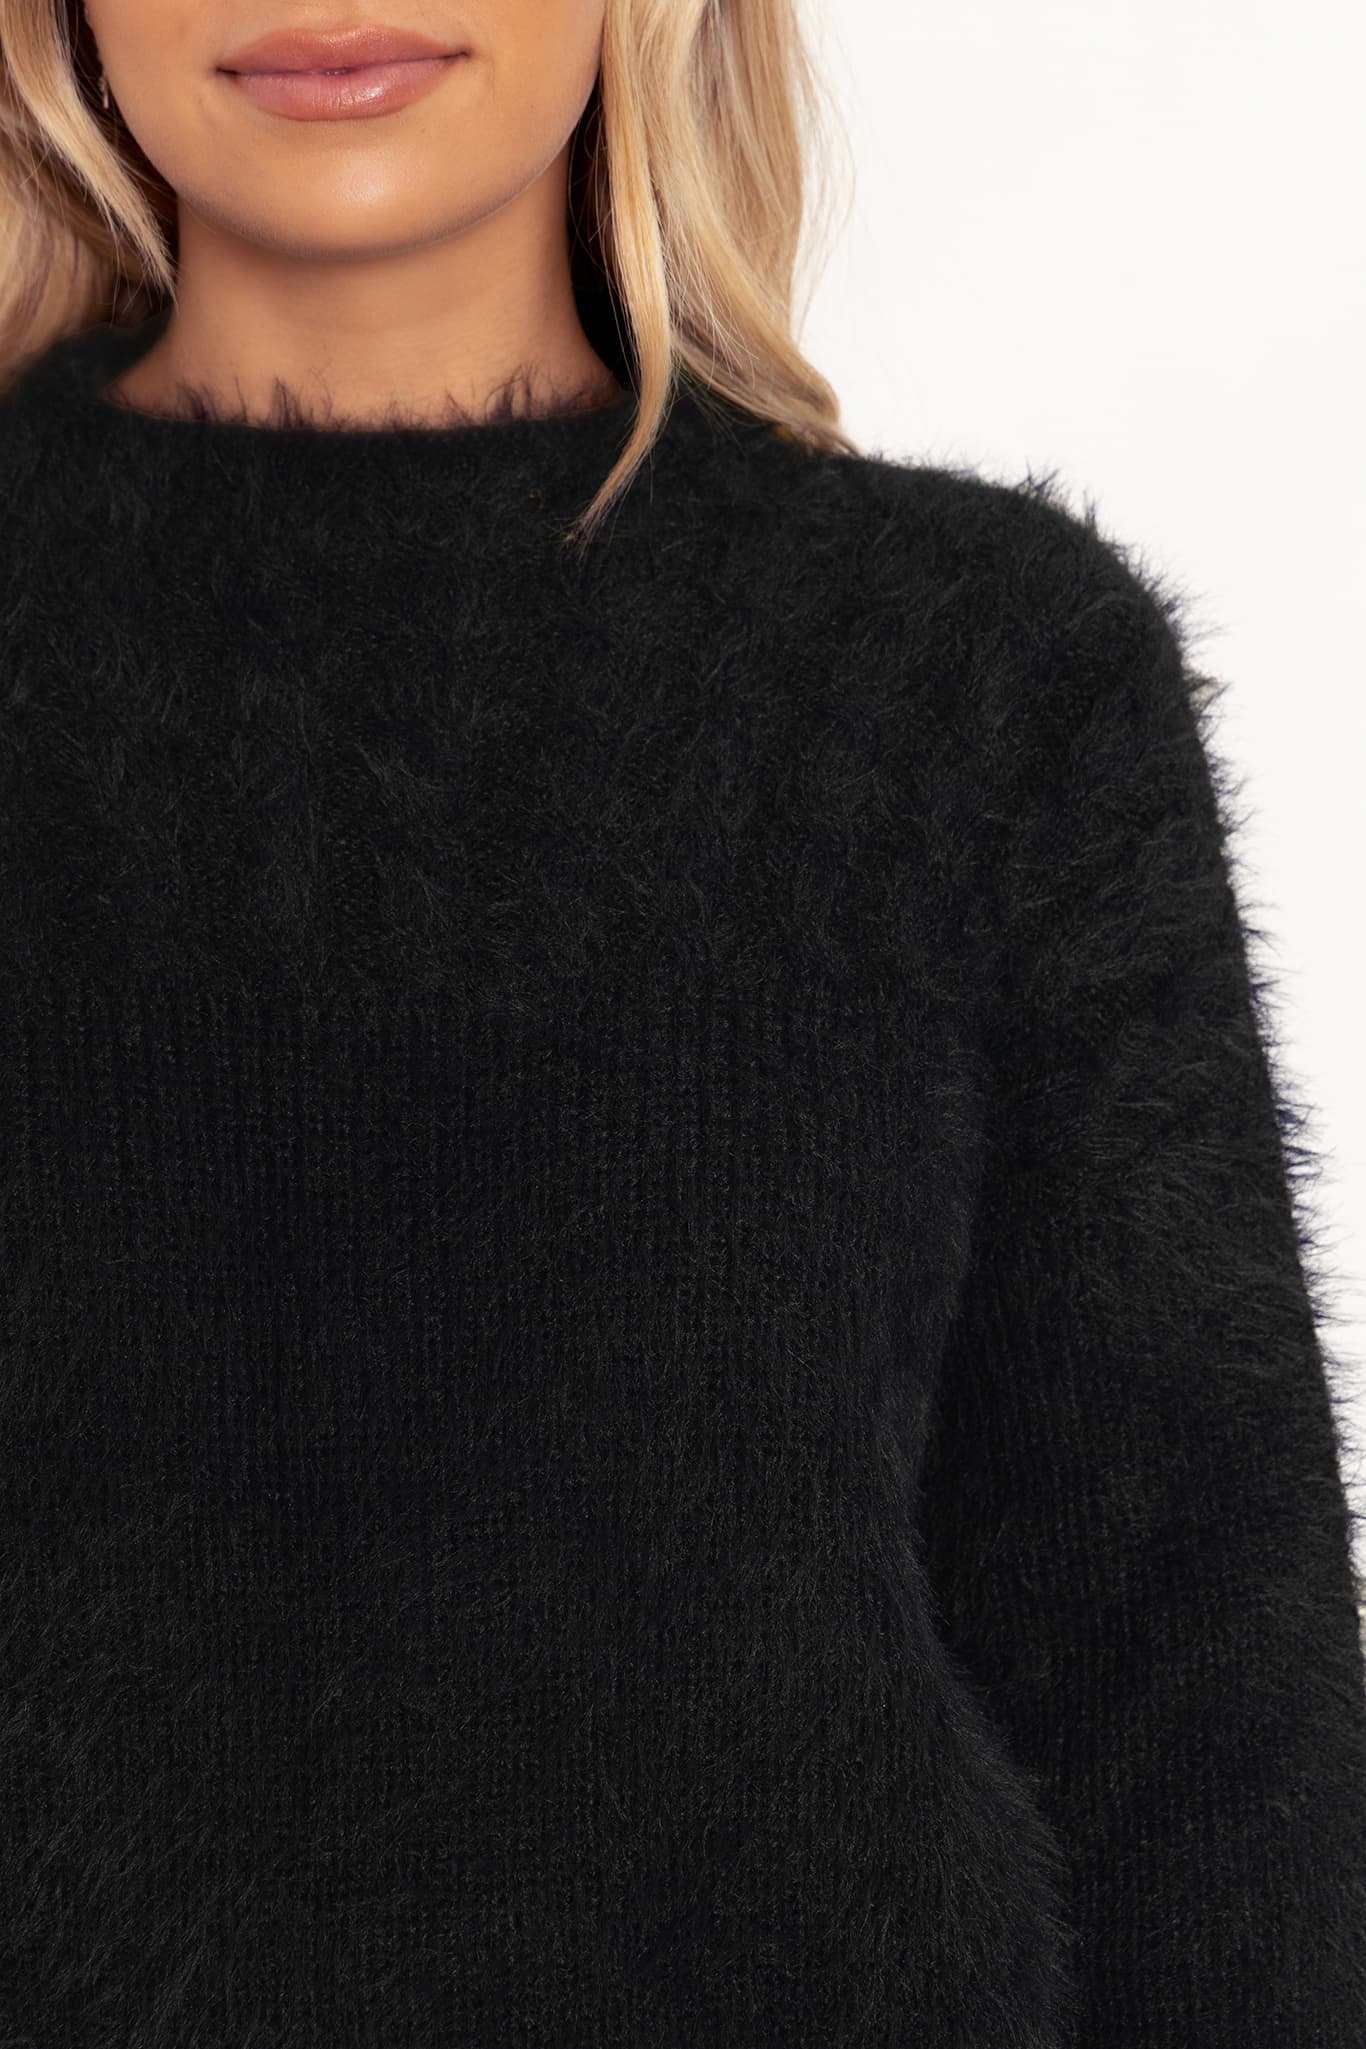 Black Feather Knit Sweater - Limited